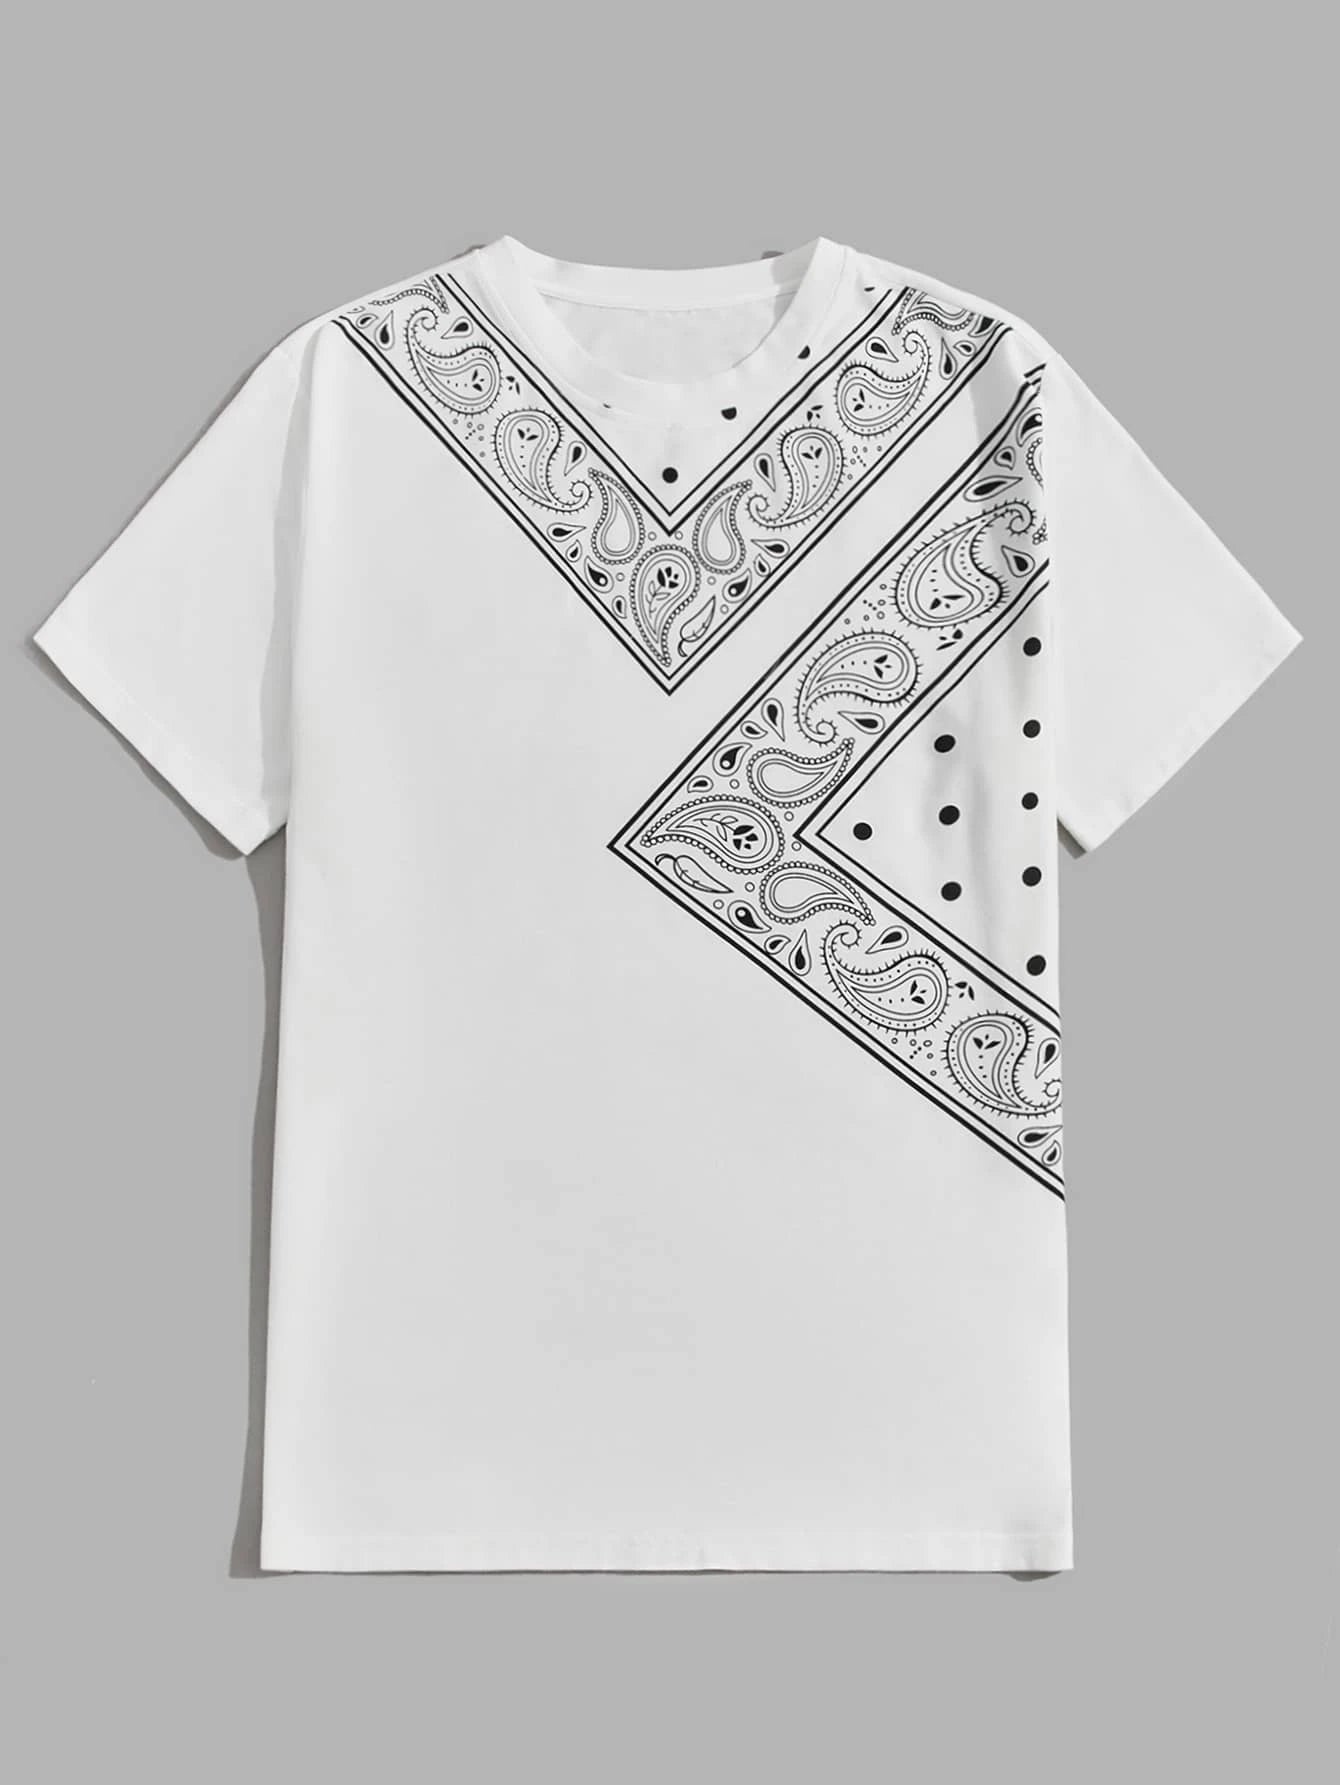 SHEIN Paisley Graphic Tee - Negative Apparel